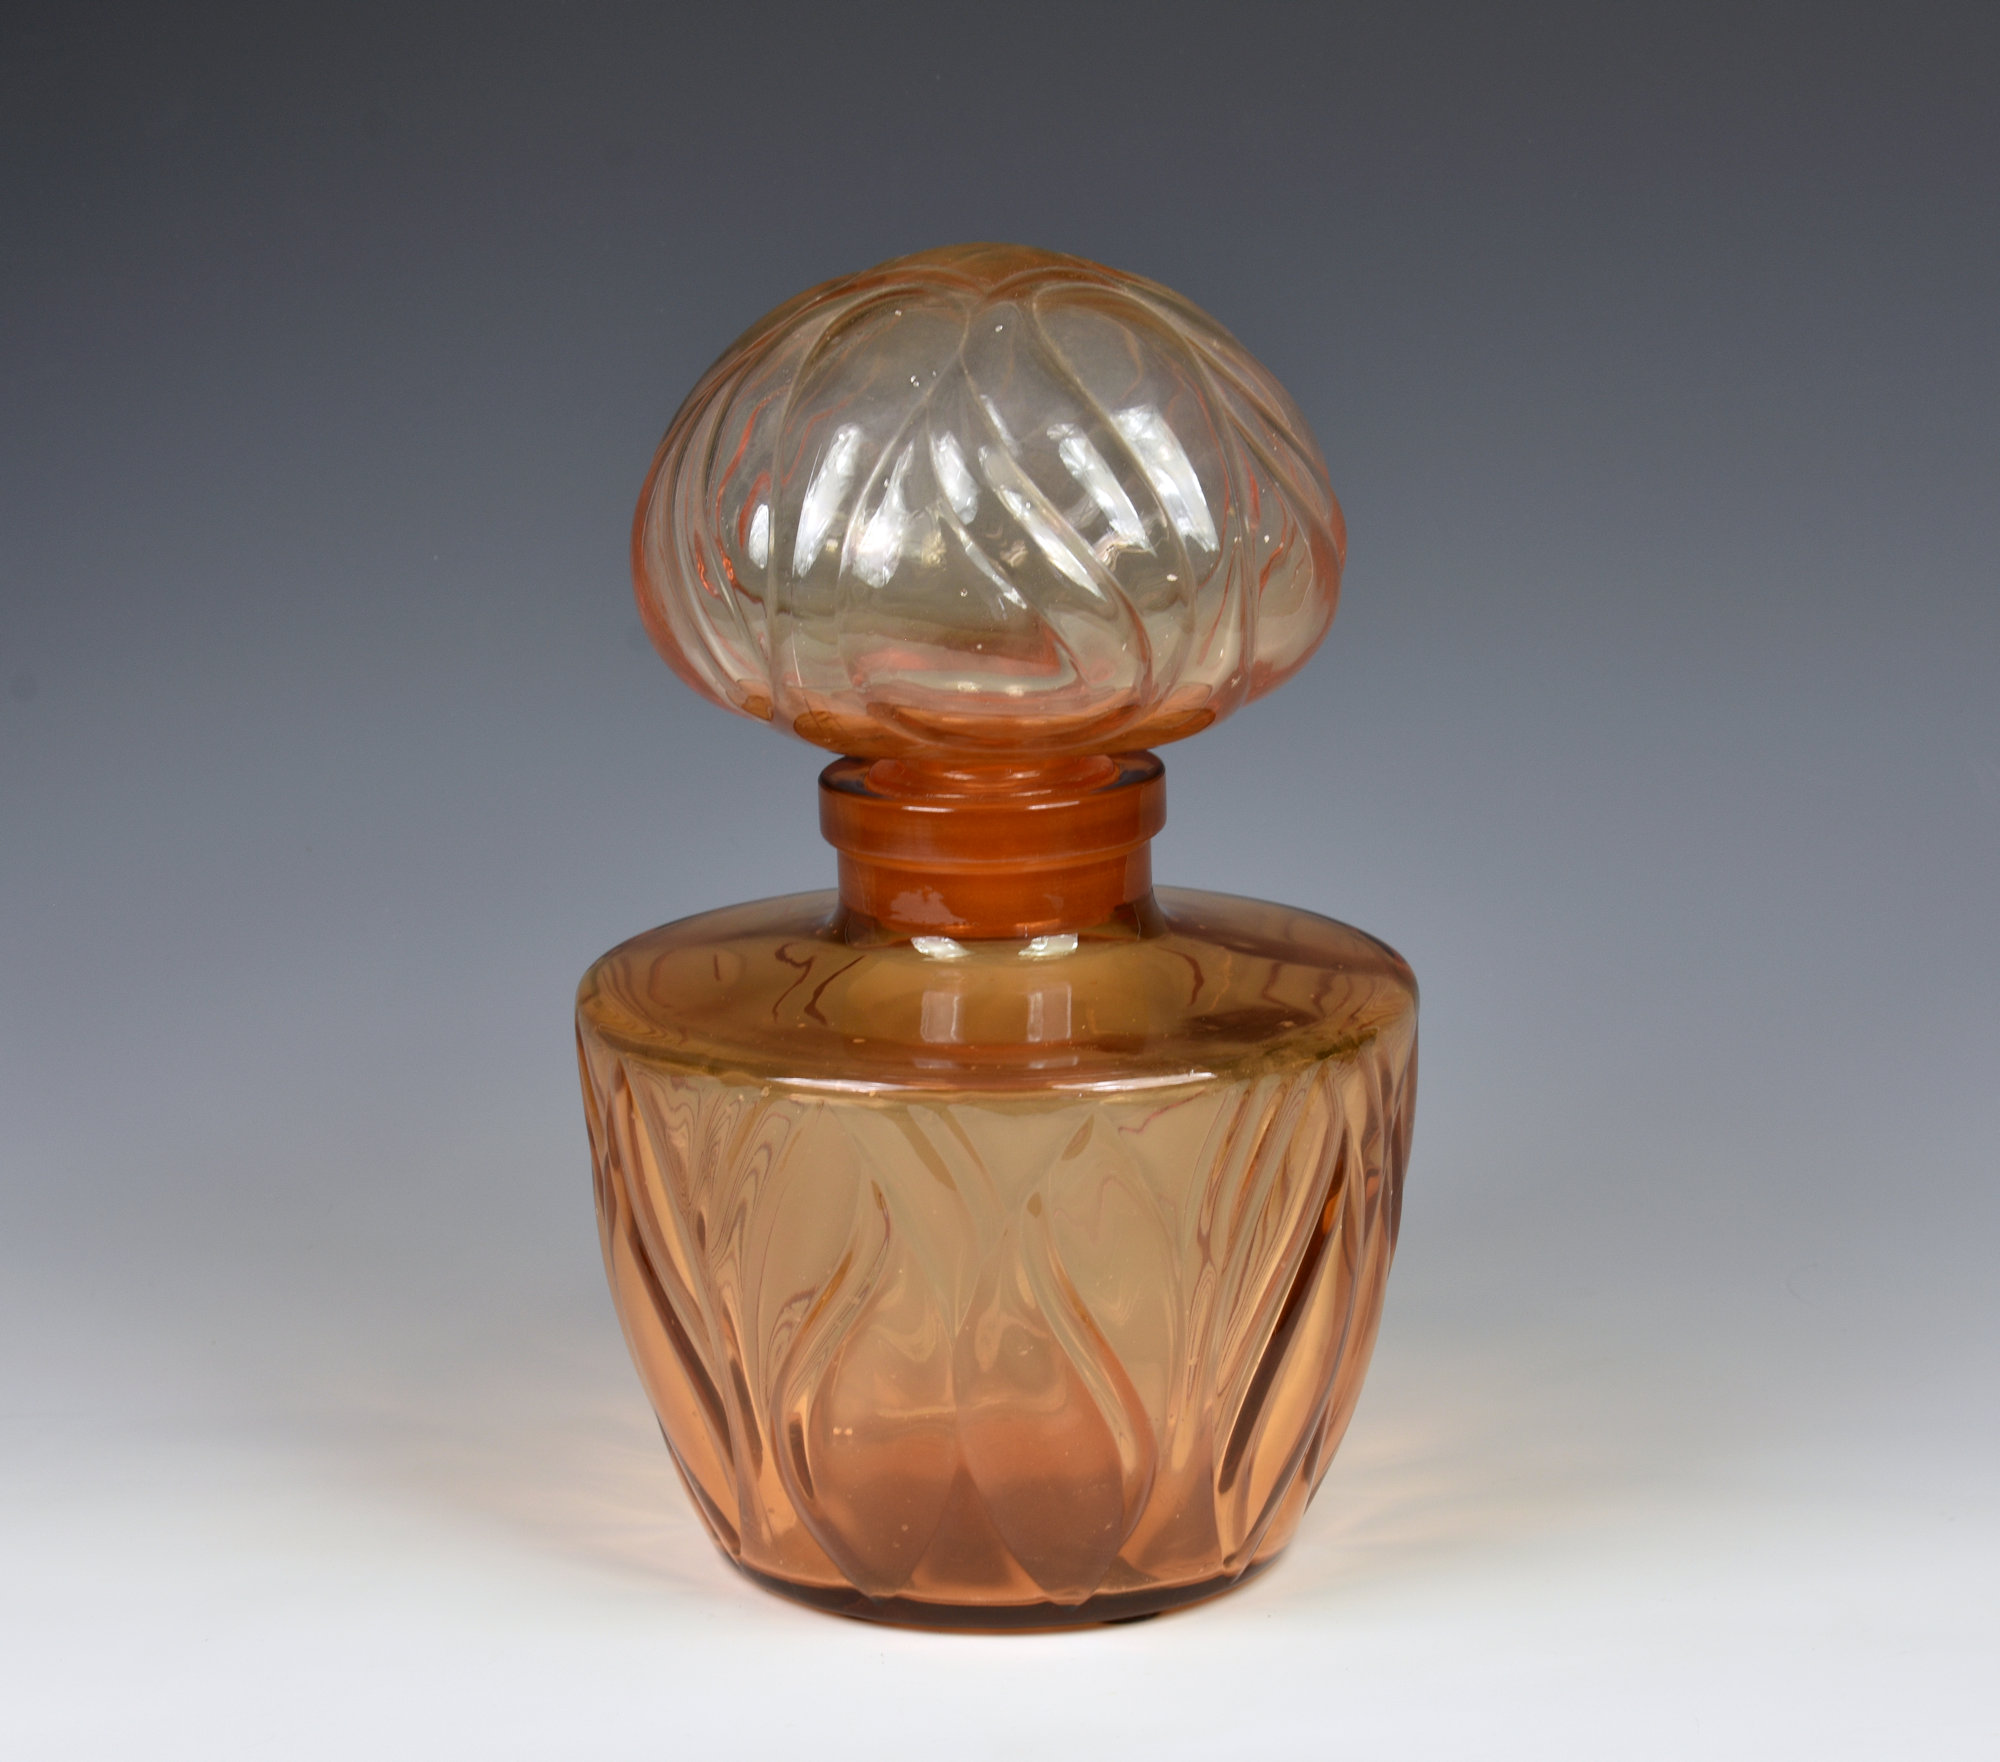 A large Faberge amber glass 'FLEURS DU MONDE' factice or perfume display bottle, 1940s, having a